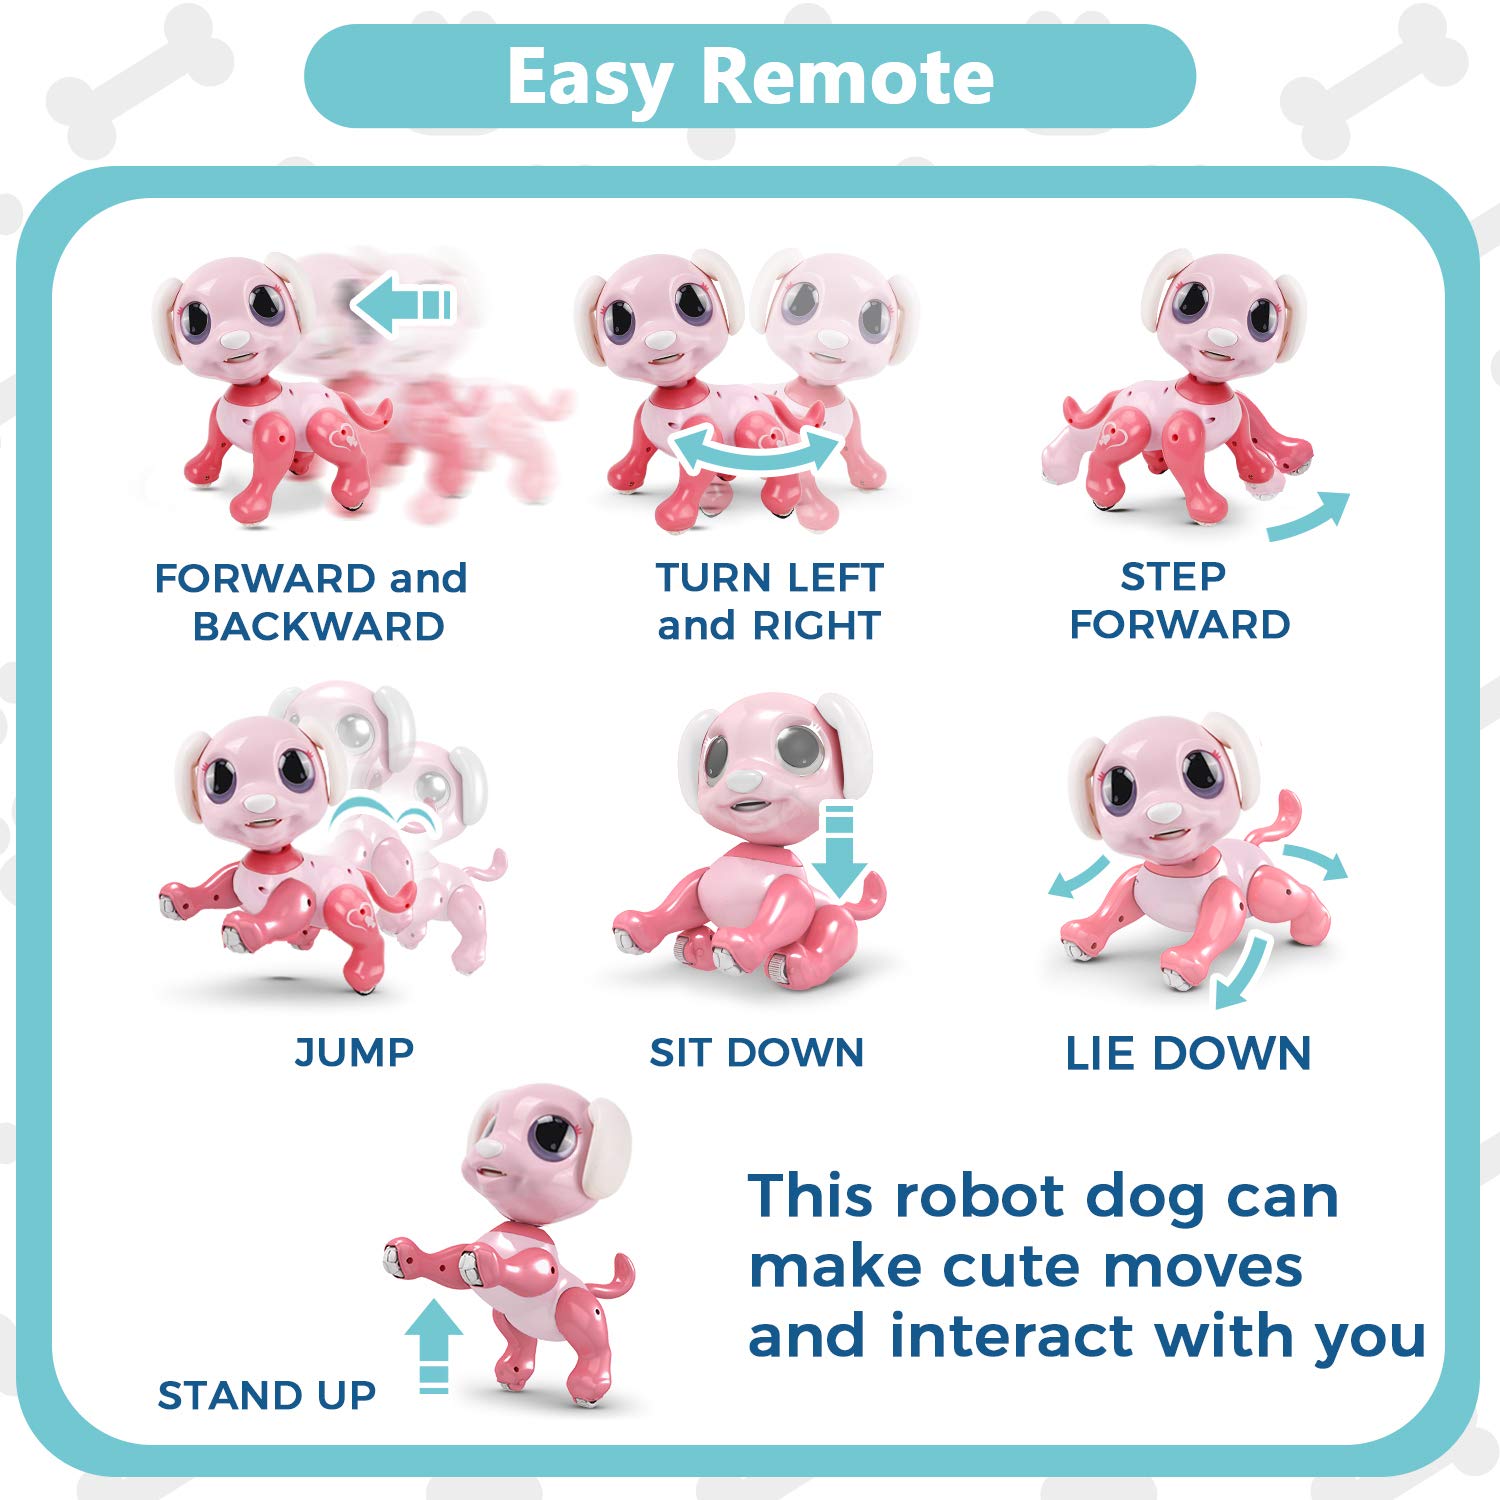 RACPNEL RC Robot Dog Toy: Interactive, Walking, Dancing, Programmable Puppy - Gesture Sensing, Lights, Sounds - Ages 3+, Pink